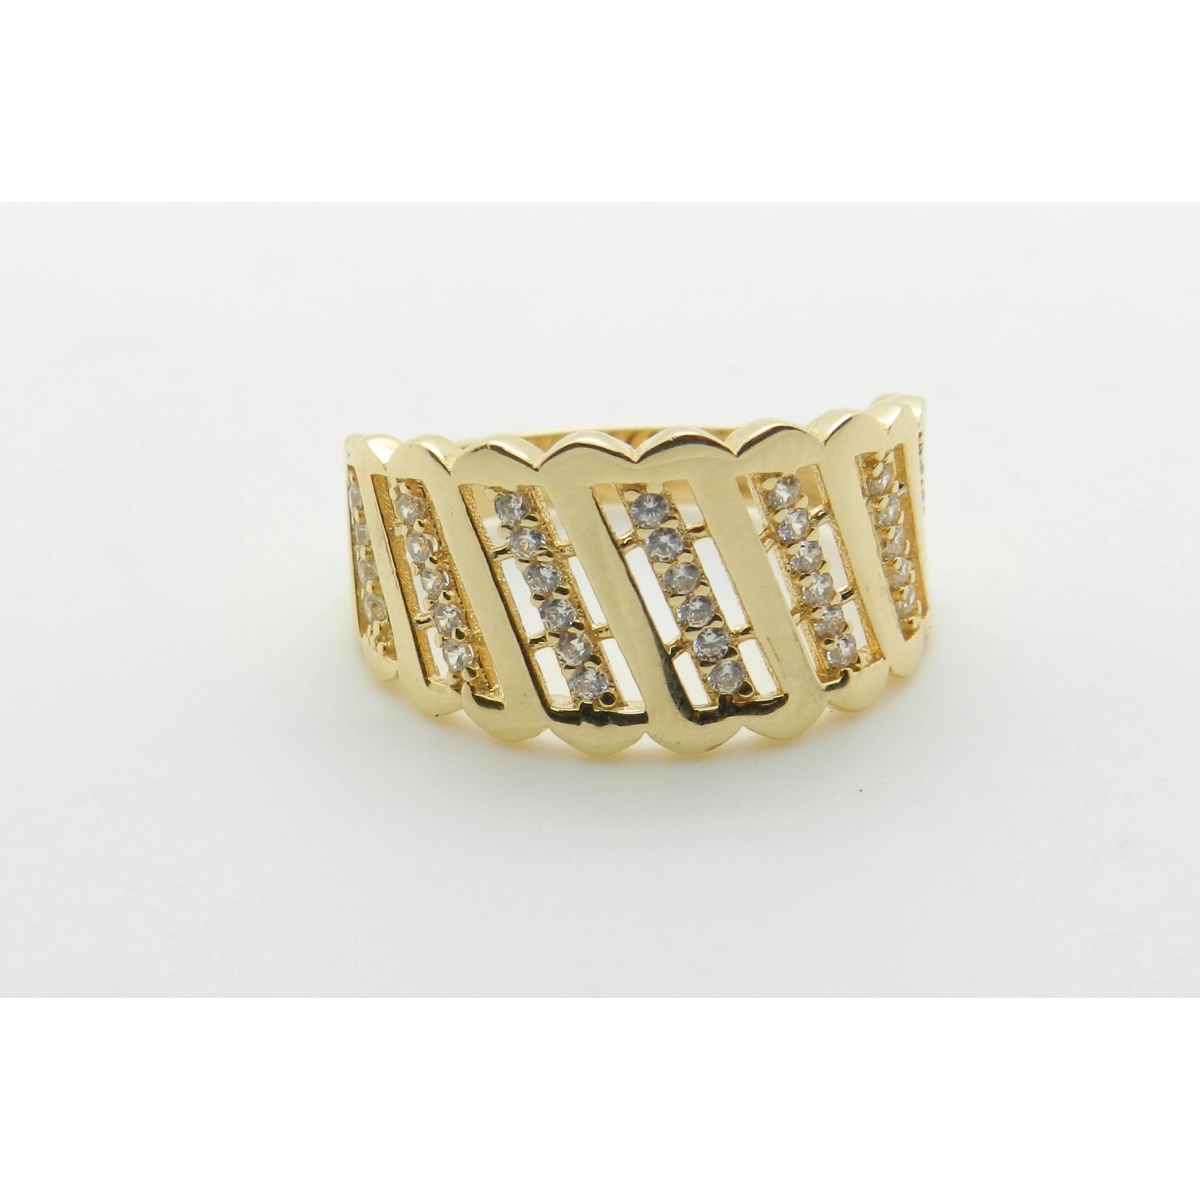 RING RING, YELLOW GOLD STONE - OWN - 477-381